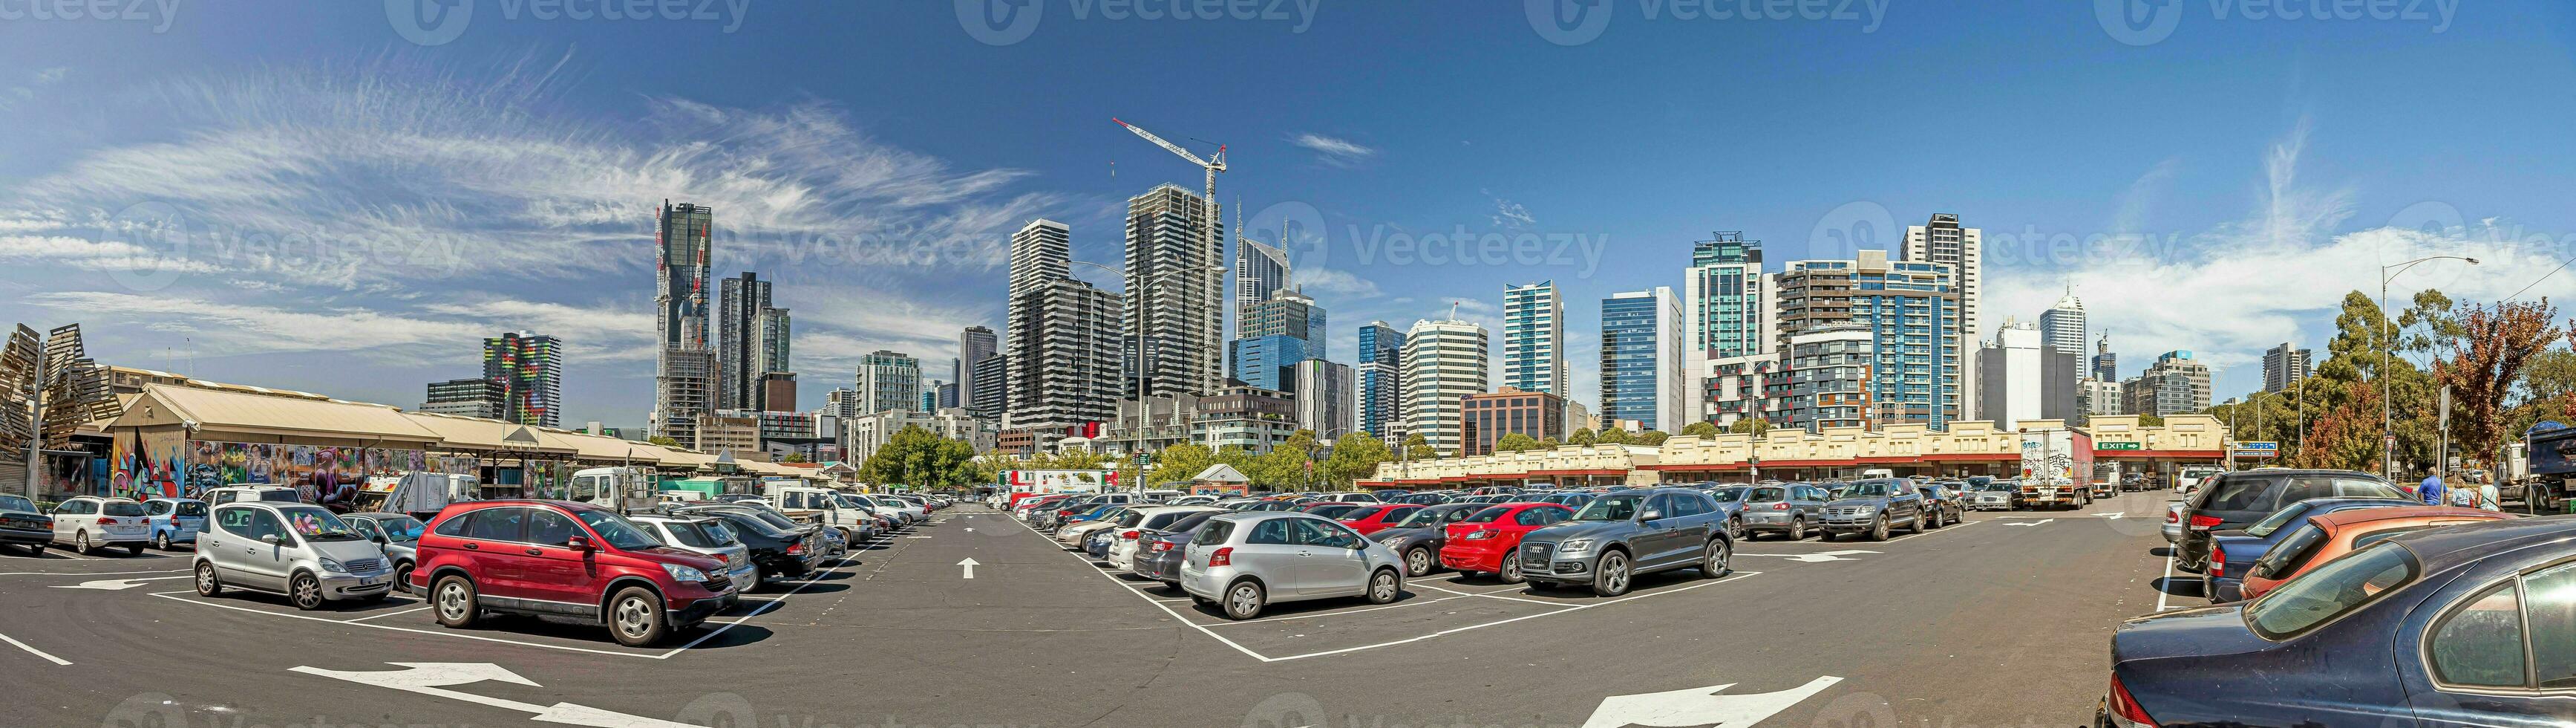 Panoramic image of Melbourne skyline taken from busy parking lot in front of shopping mall photo